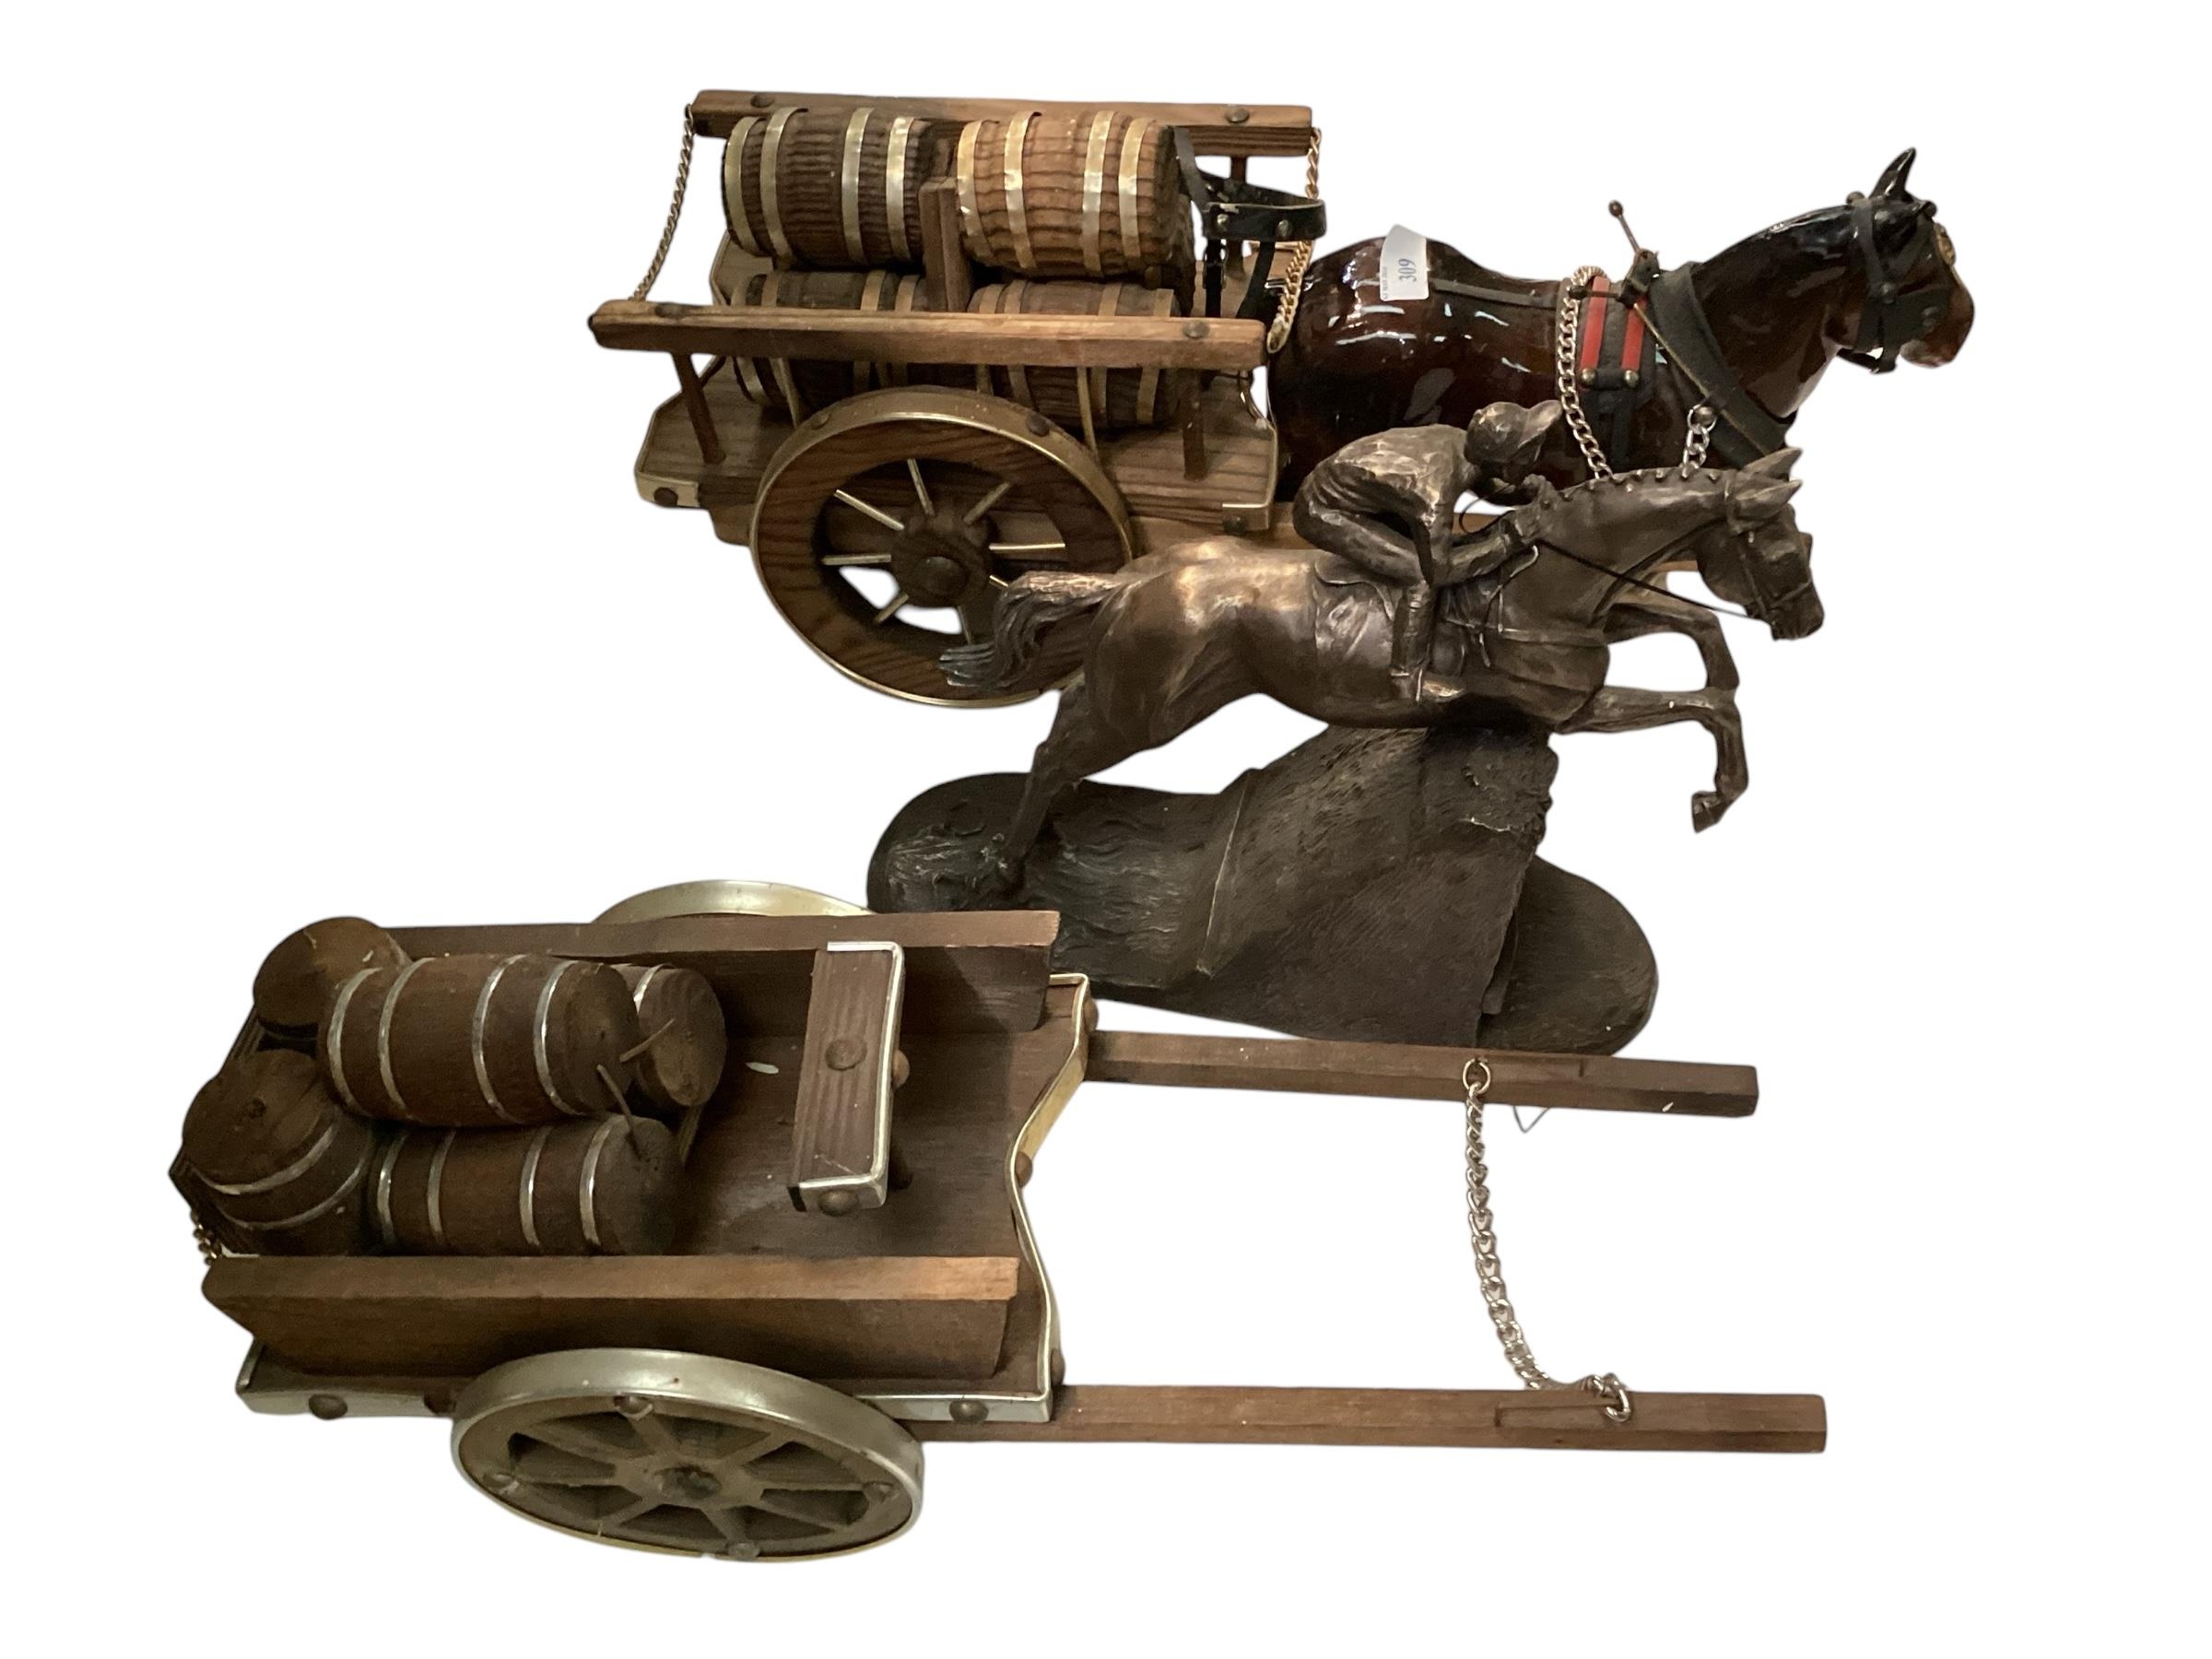 A china dray/cart horse, with barrels, and two carts, and a bronze style jockey and horse